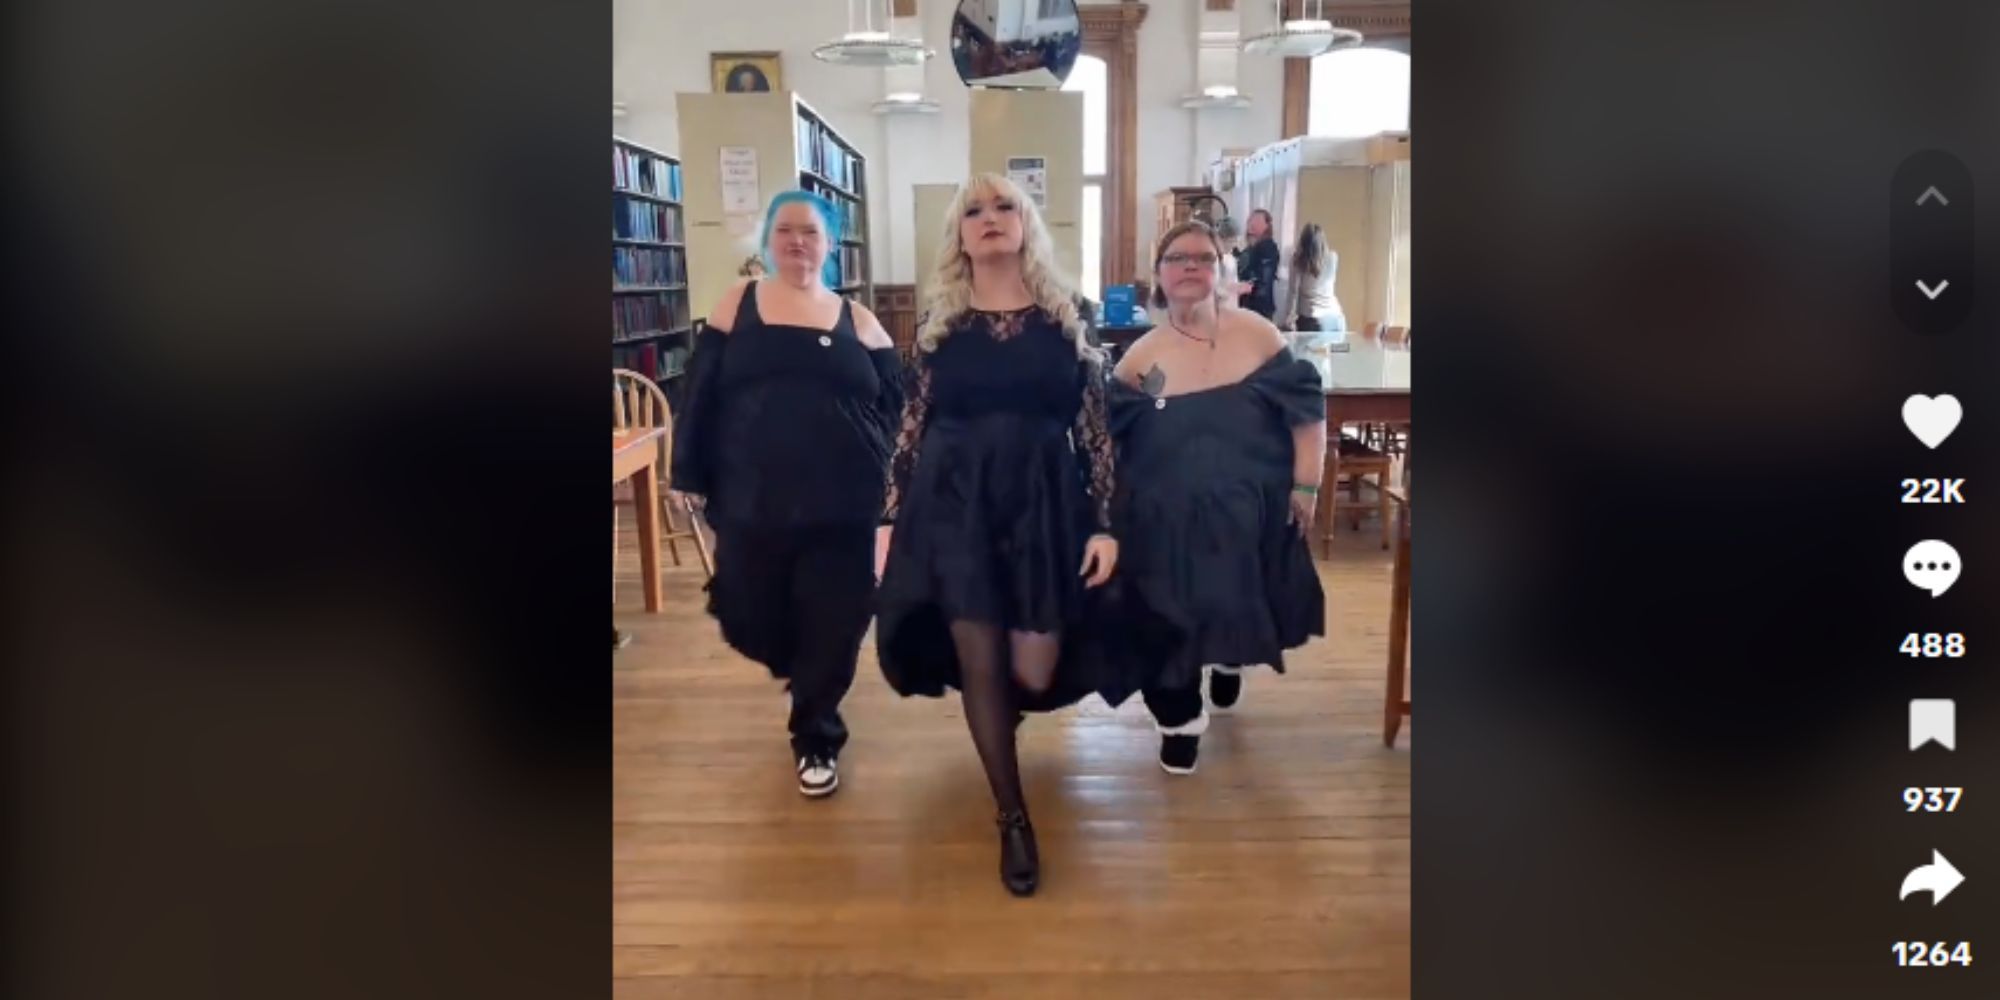 1000-lb Sisters' Amy Slaton and Tammy Slaton and friend in all black, catwalking at a library.